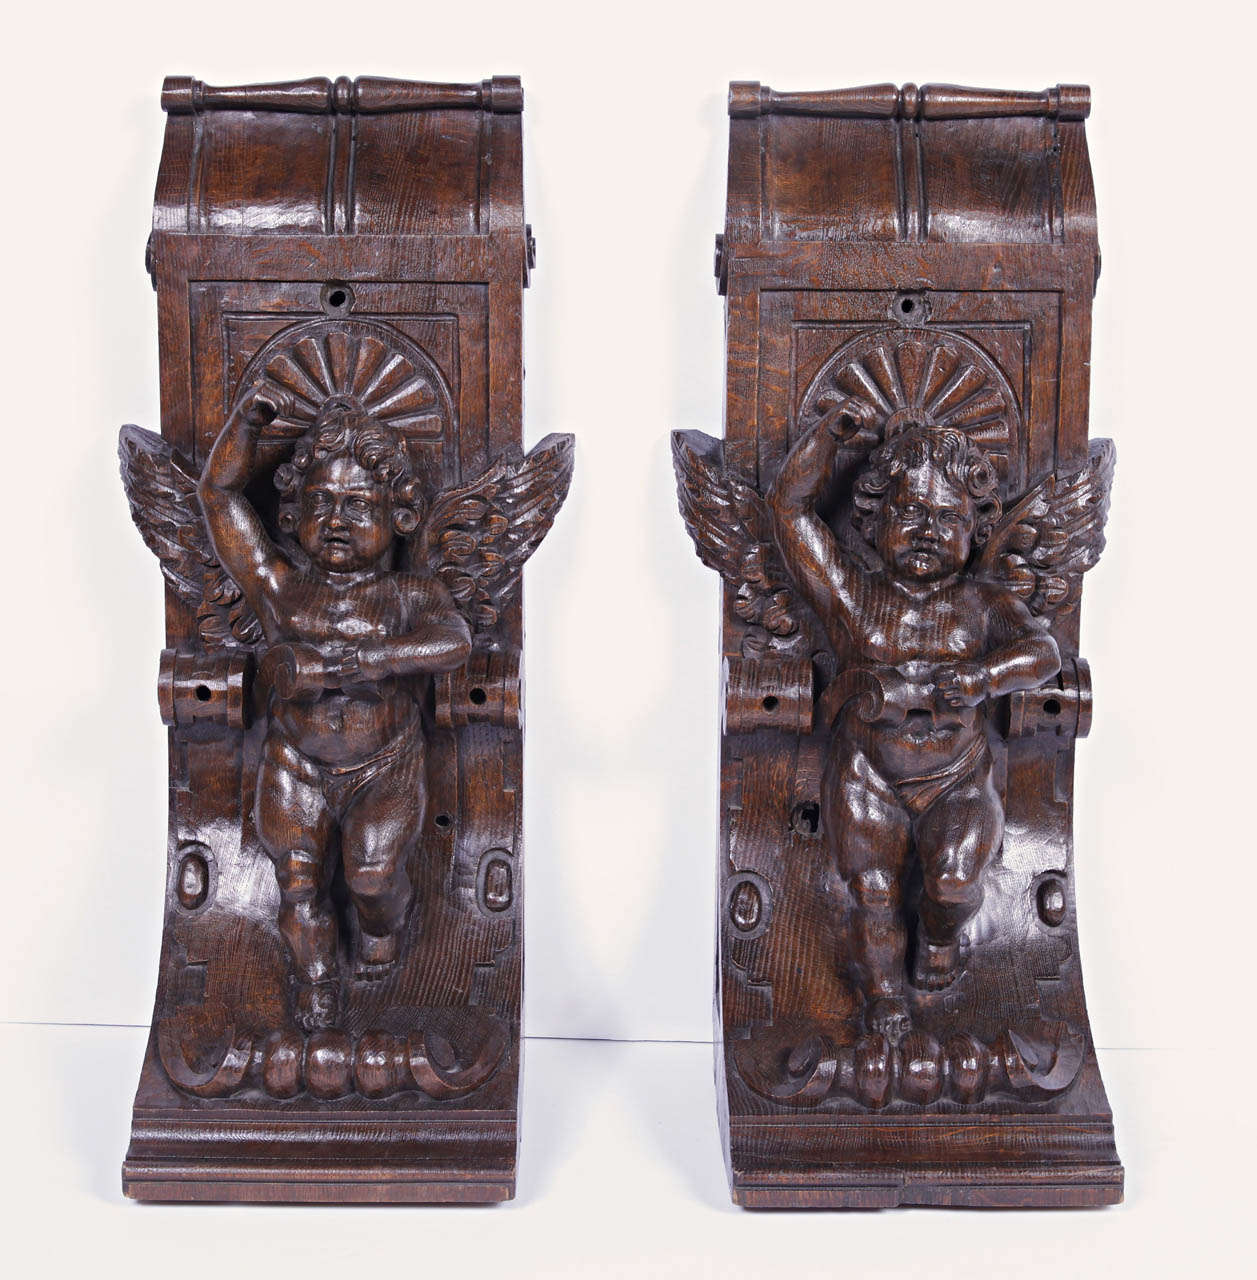 This stunning pair of French hand carved, decorated, oak corbels depict cherubs within an elongated, incurved stylized cartouche.  Above their heads is a stylized palmette, and their are arms rest upon the upper portion of a c-scroll. The wings wrap